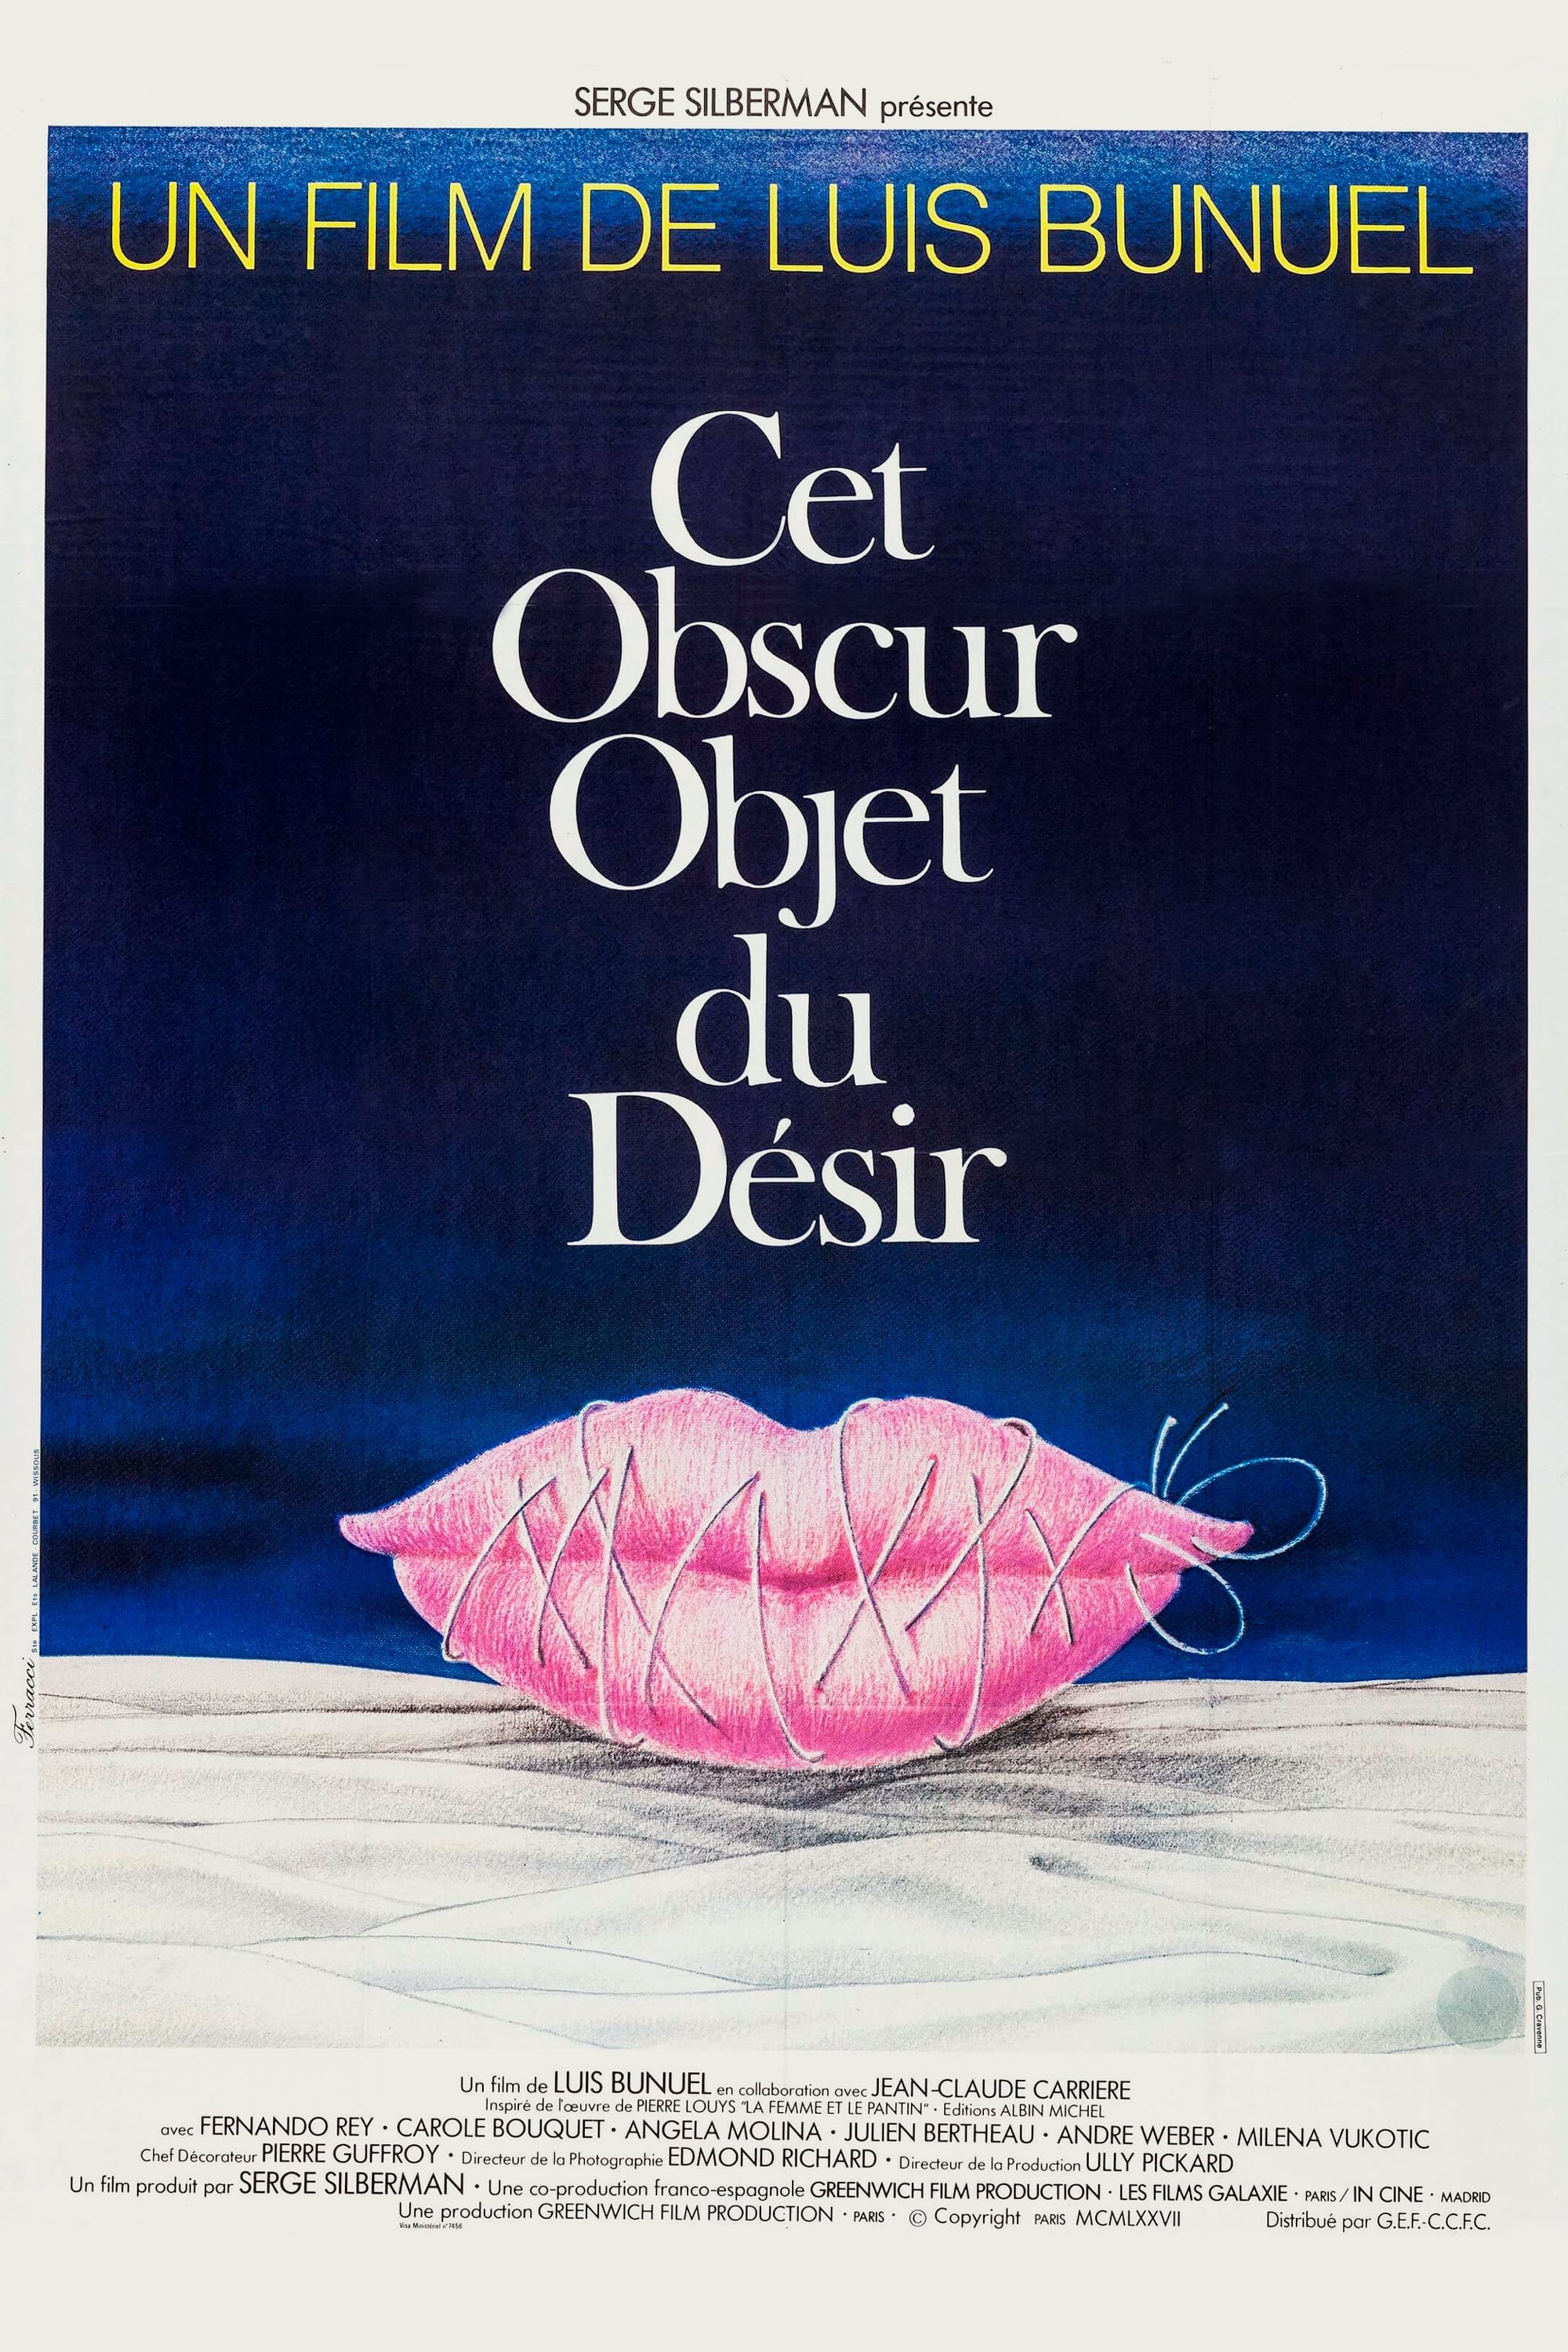 Dục Vọng Mơ Hồ (That Obscure Object of Desire) [1977]